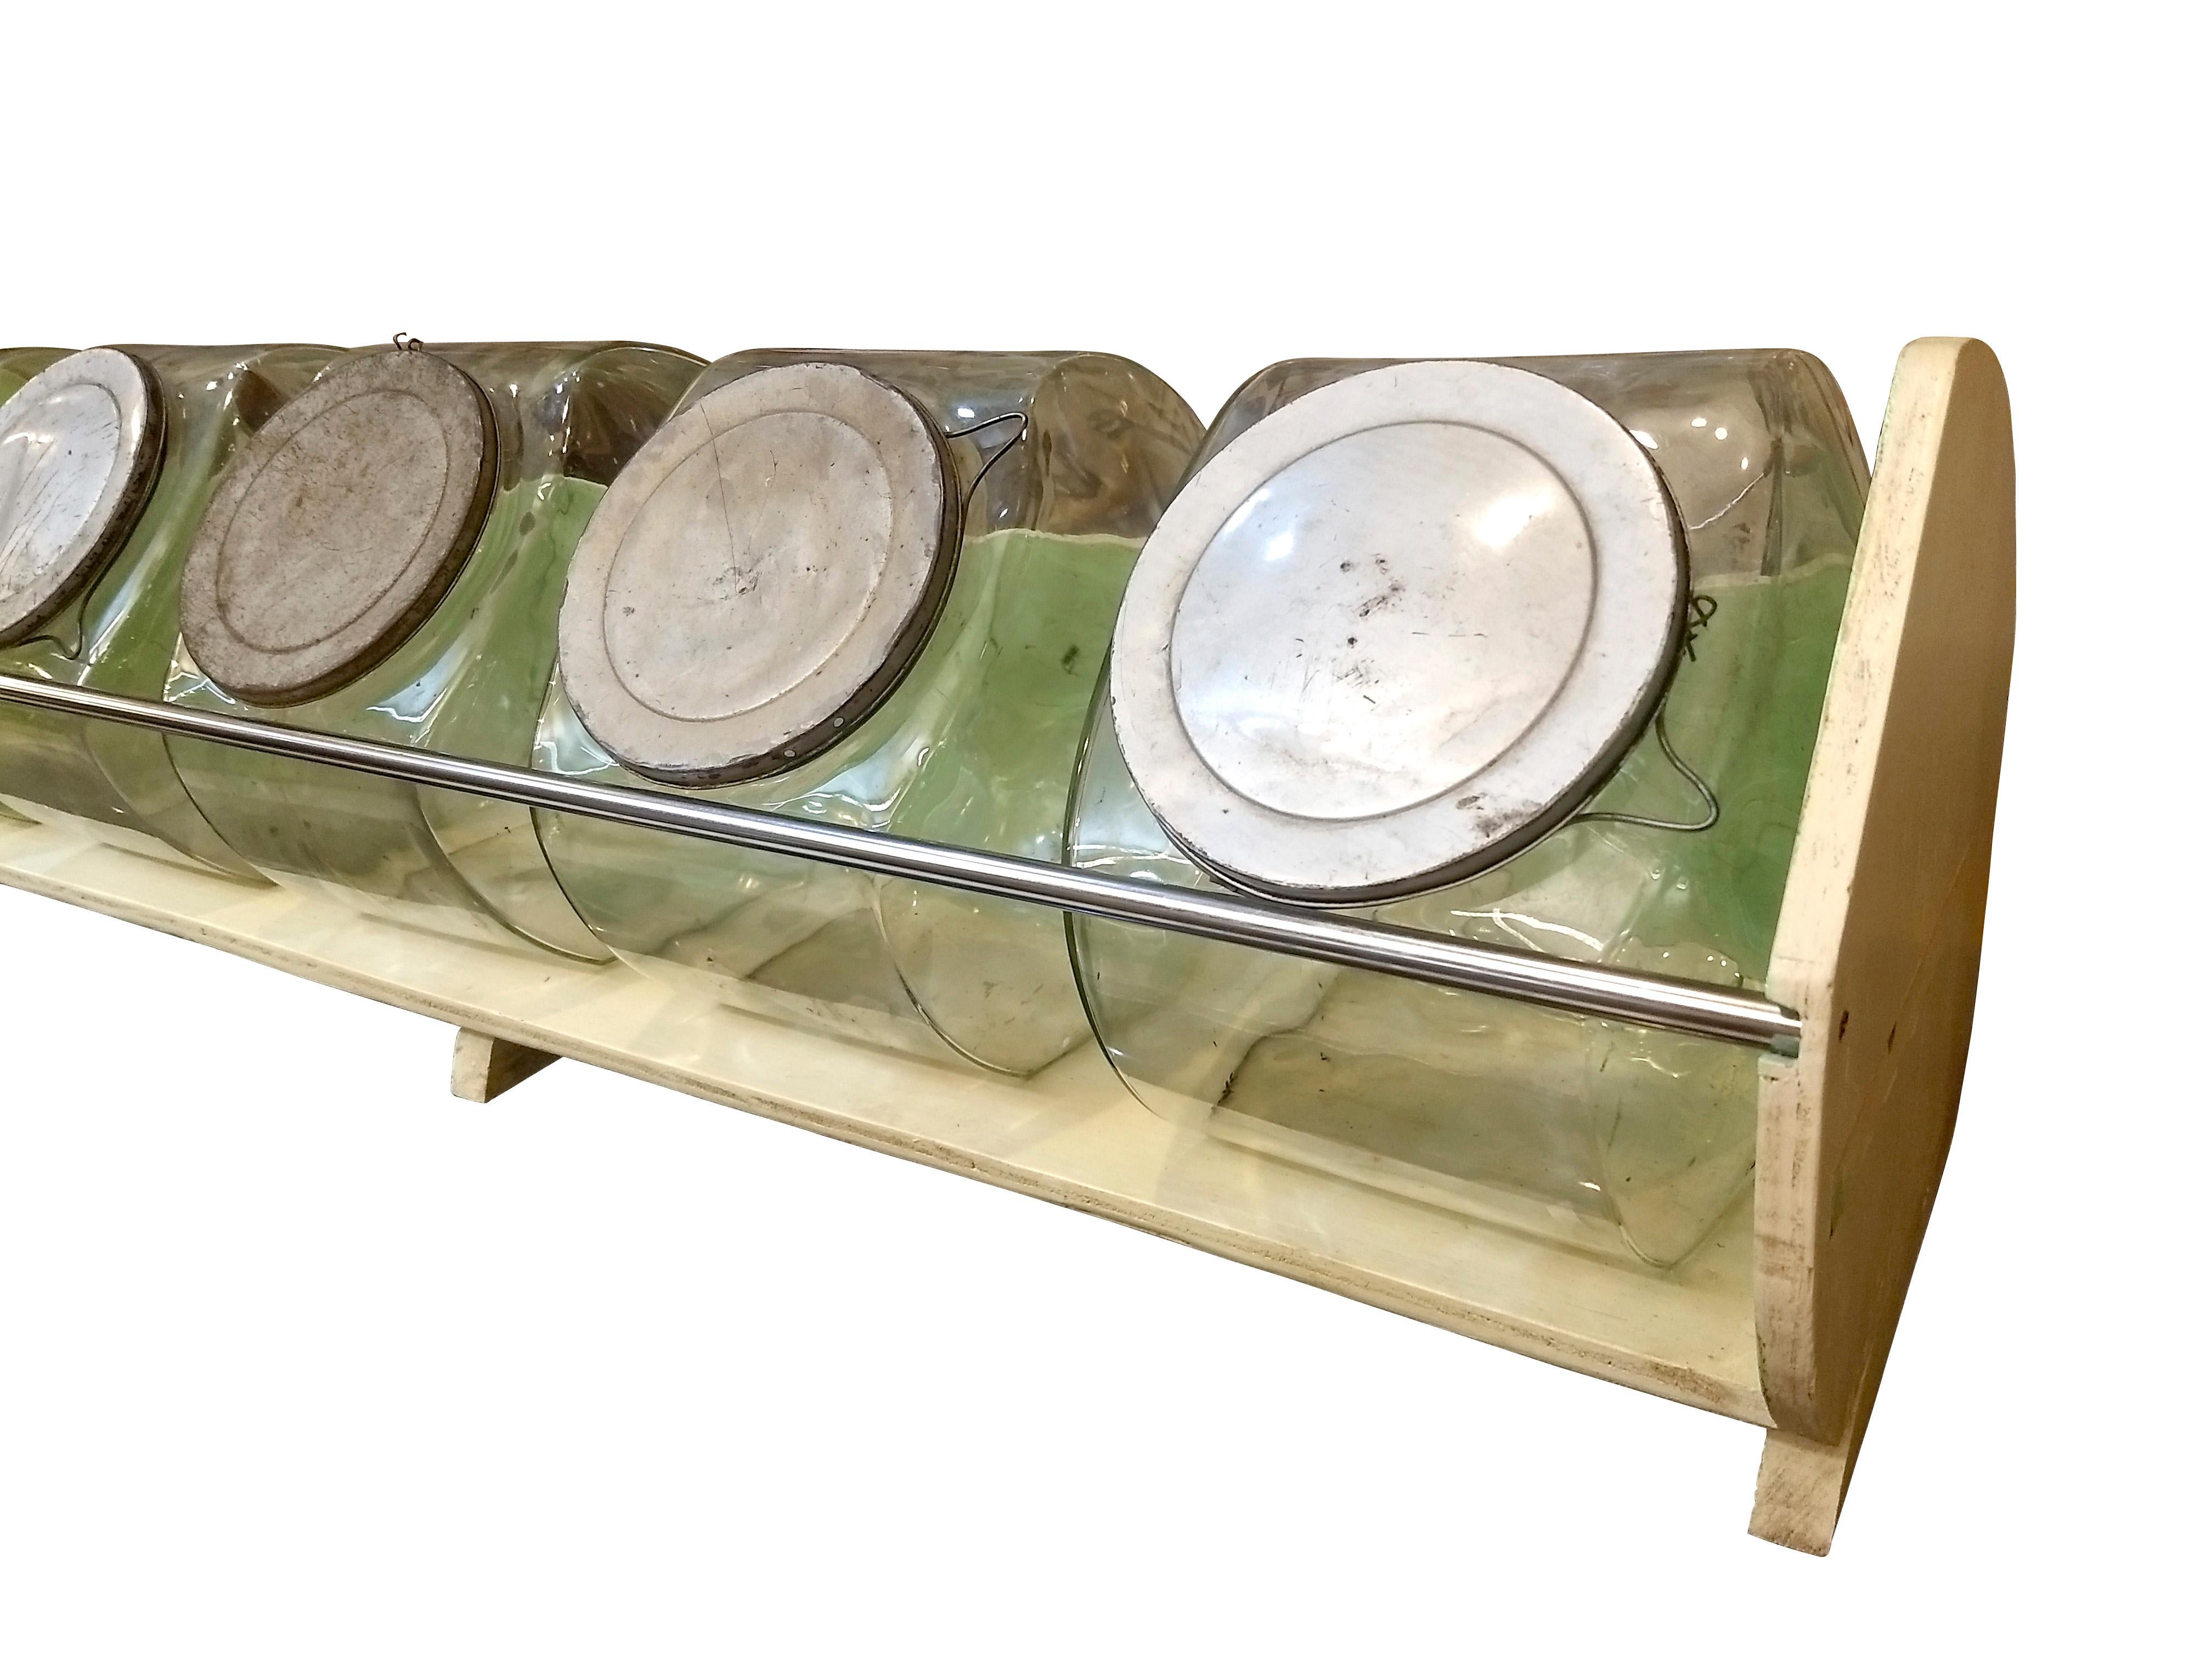 Original Display from a convenience neighborhood store in Mexico City probably from 1950. The display is made out of plywood painted in custard and pistachio colors with a protective chromed metal bar. It holds five original thick glass jars with